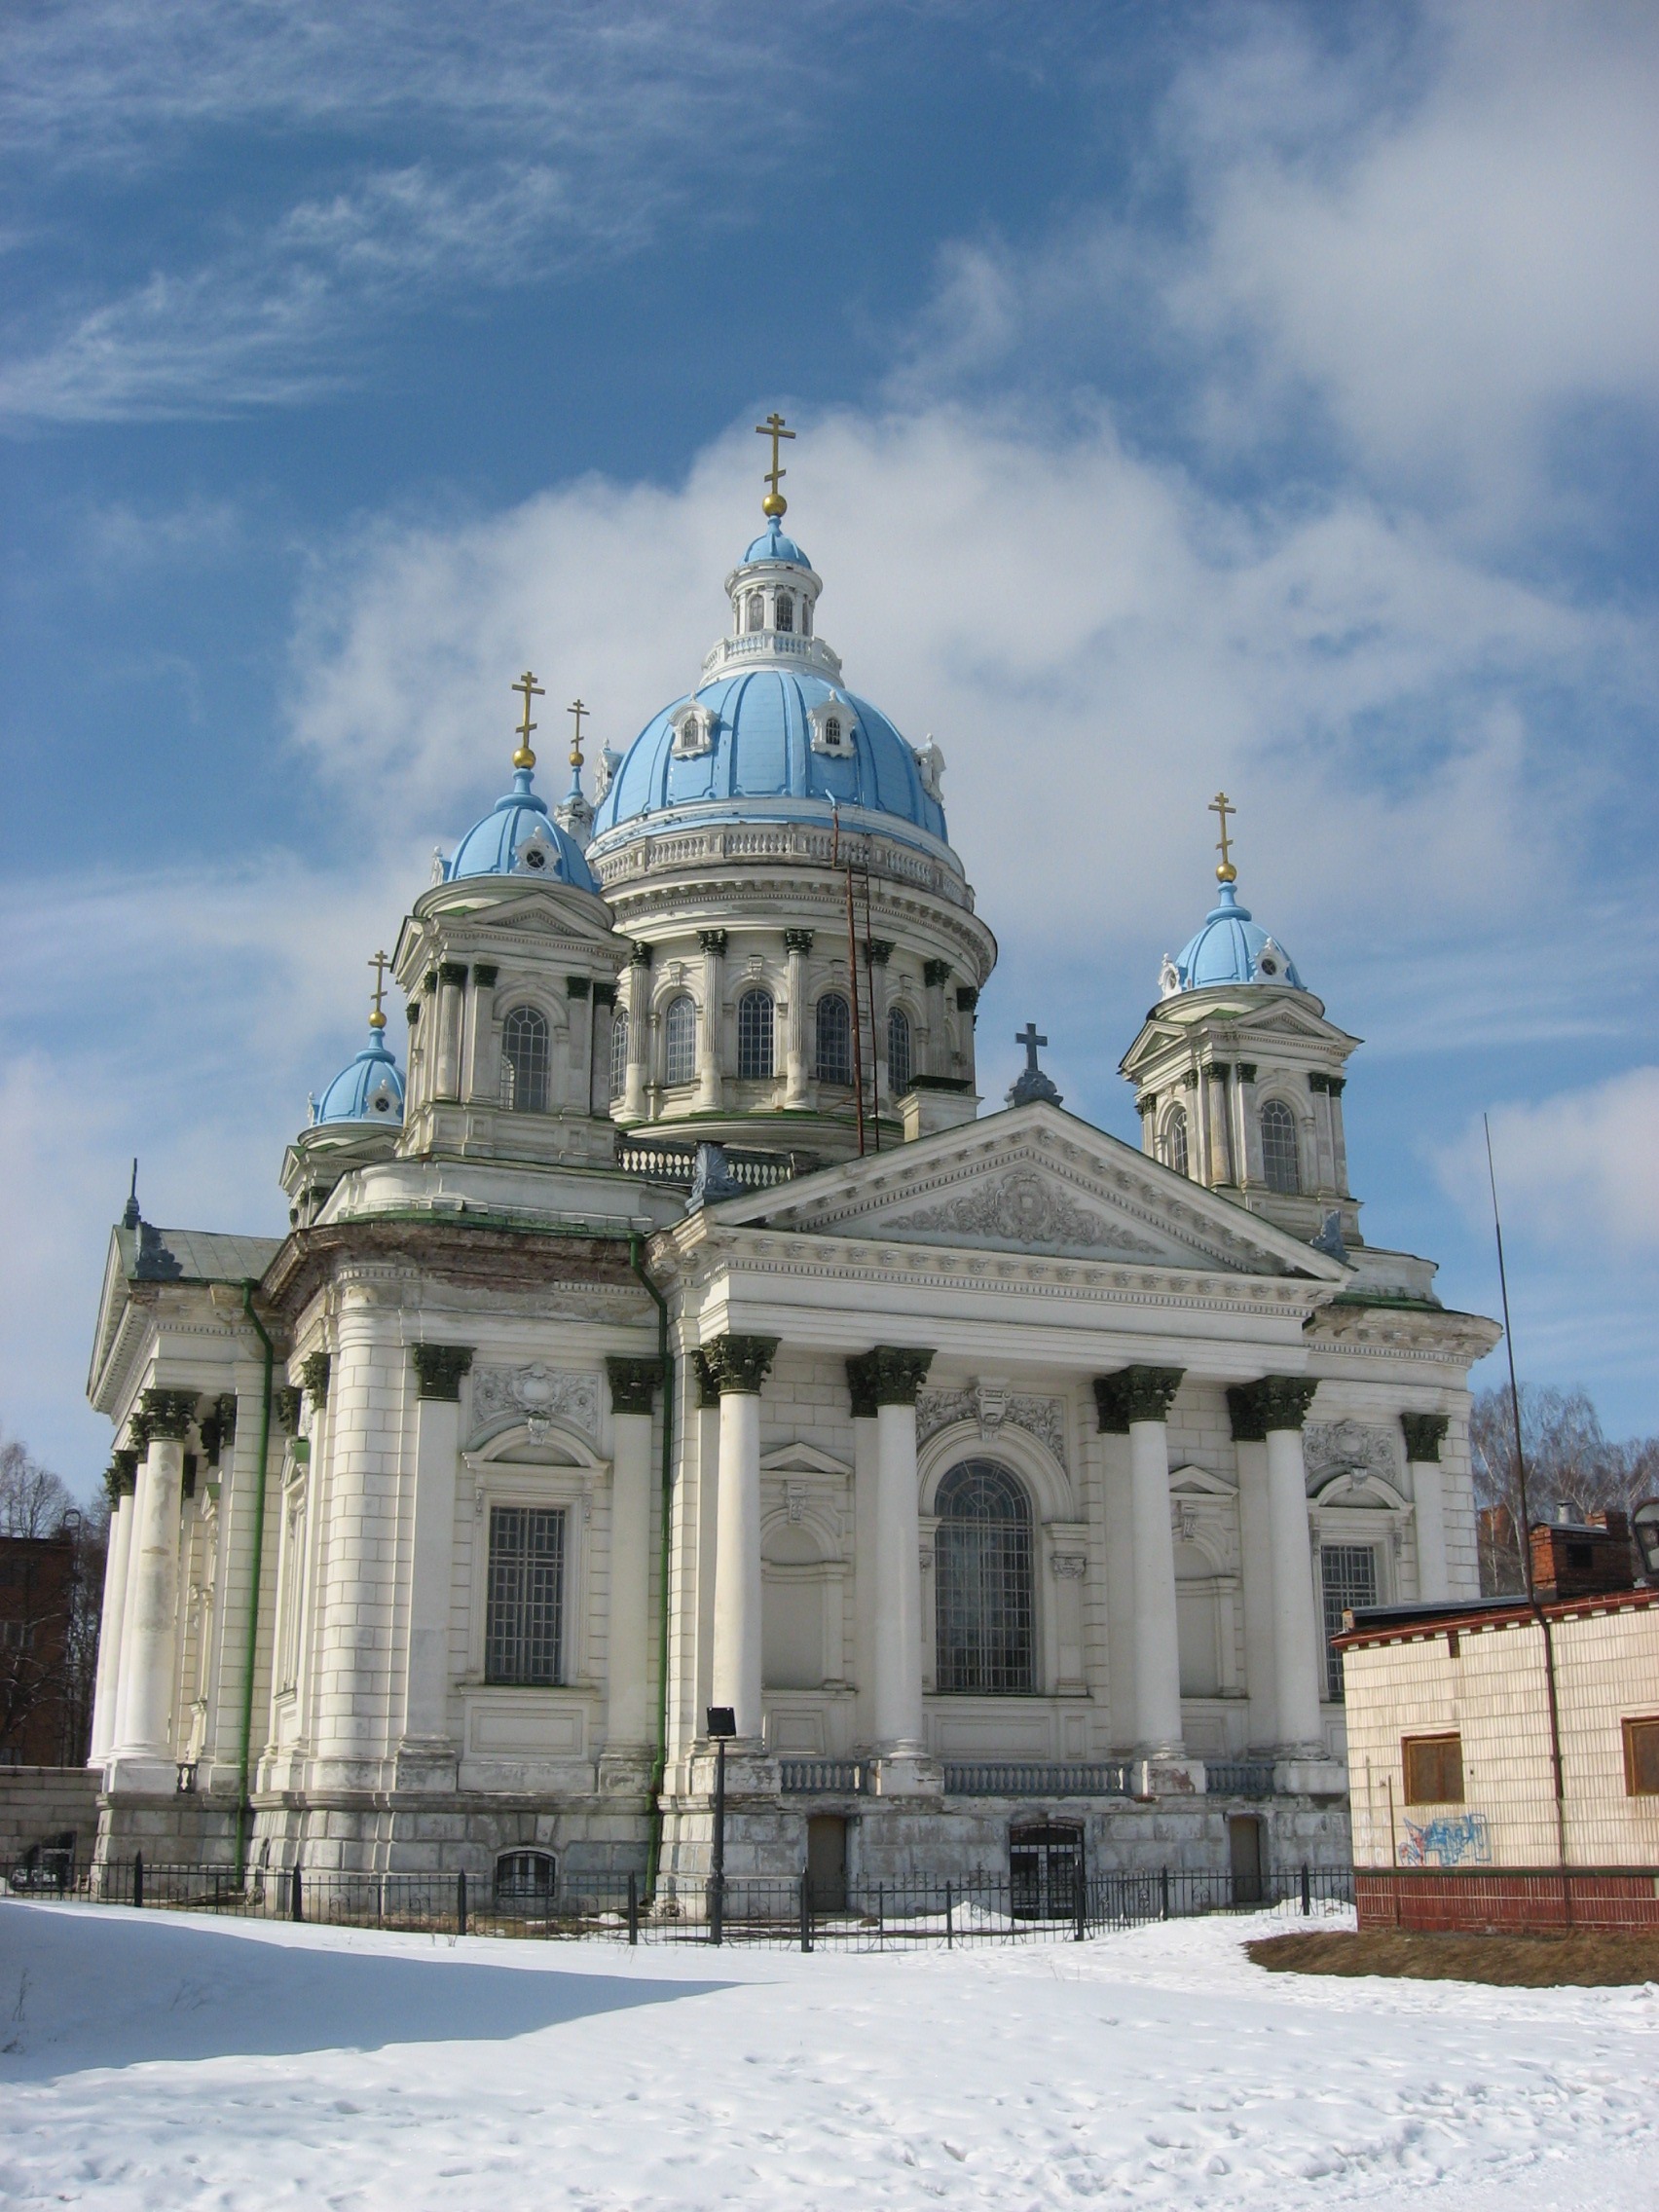 File:Sumy - Troicky cathedral.JPG - Wikimedia Commons